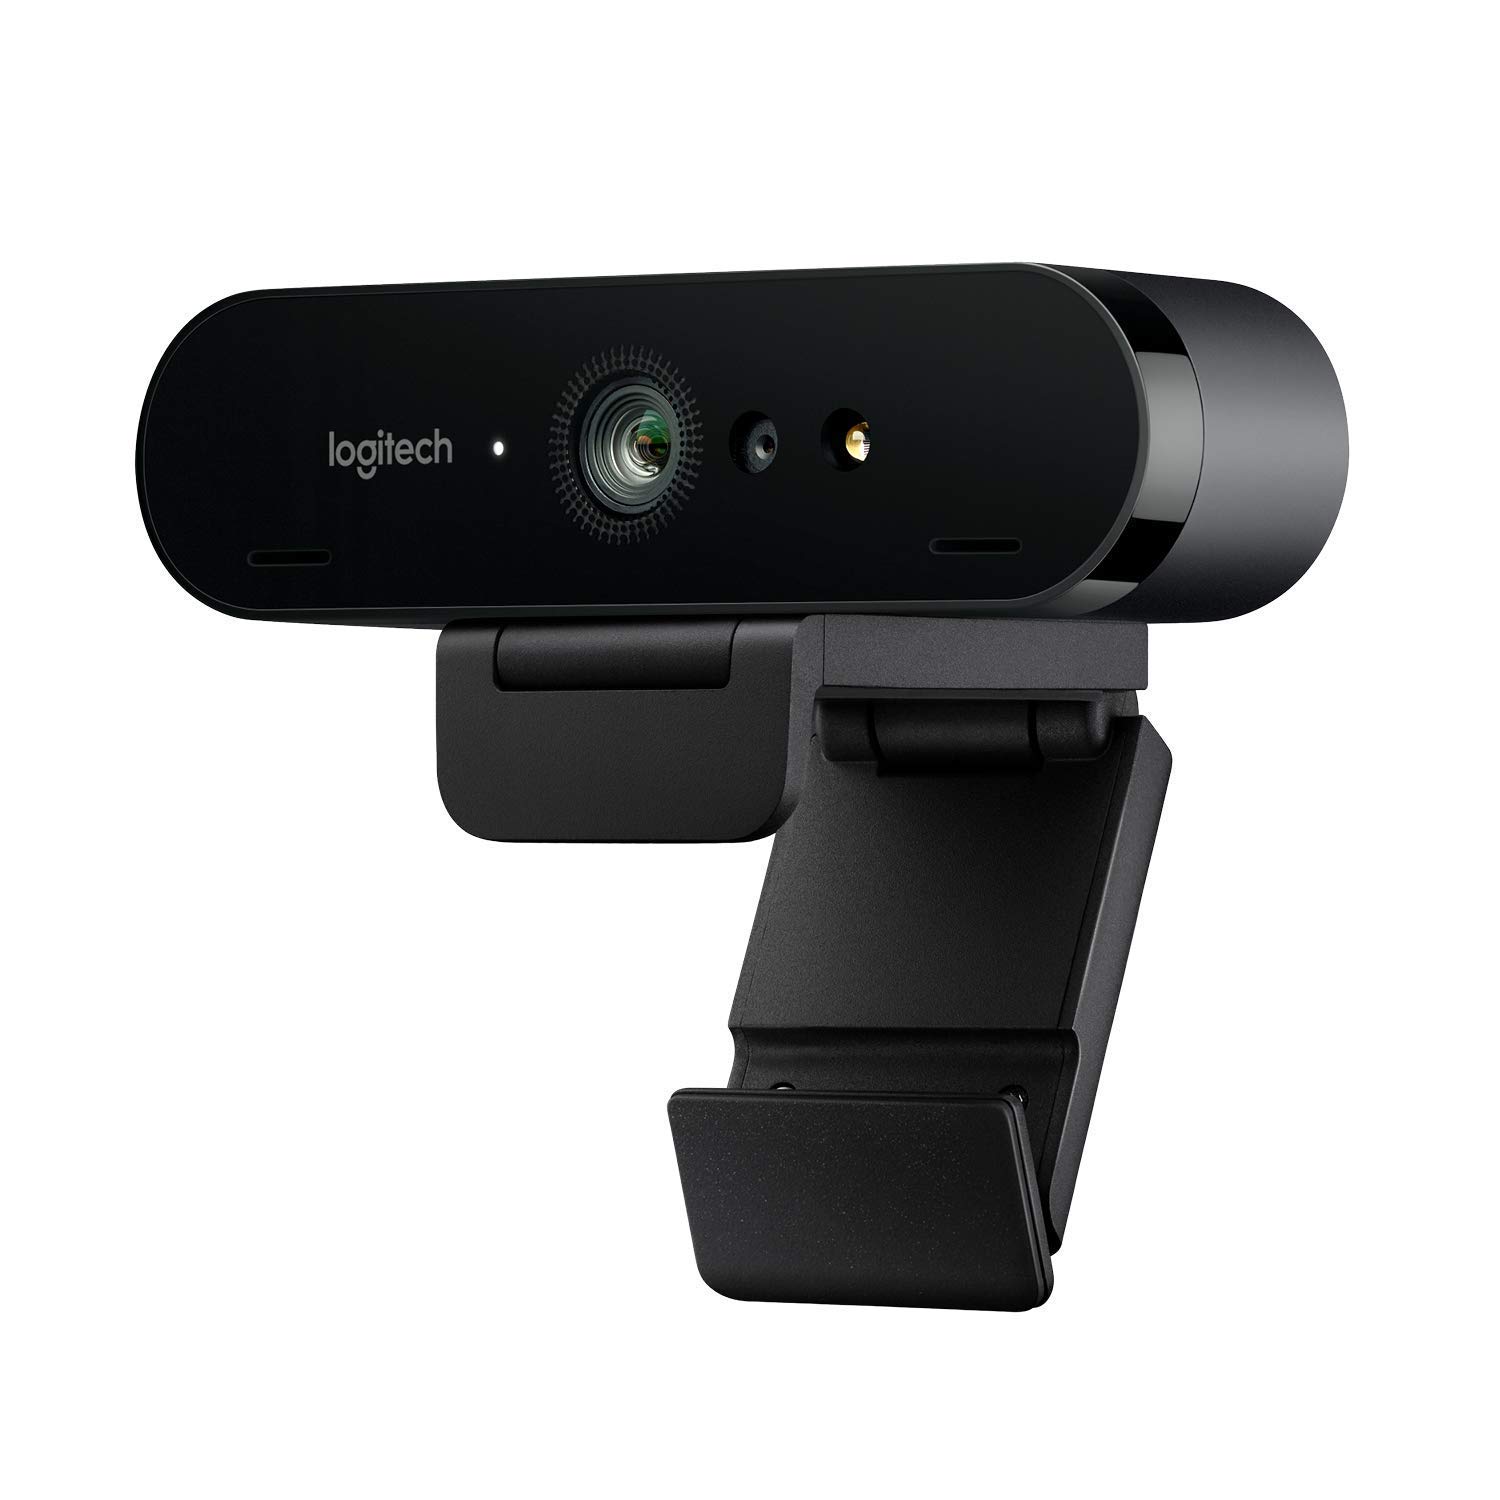 Brio Stream Webcam, HD 4K Streaming Edition, 1080p/60fps Hyper-Fast Streaming, Wide Adjustable Field of View for Gaming, Works with Skype, Zoom, Xsplit, PC/Xbox/Laptop - sathya.in